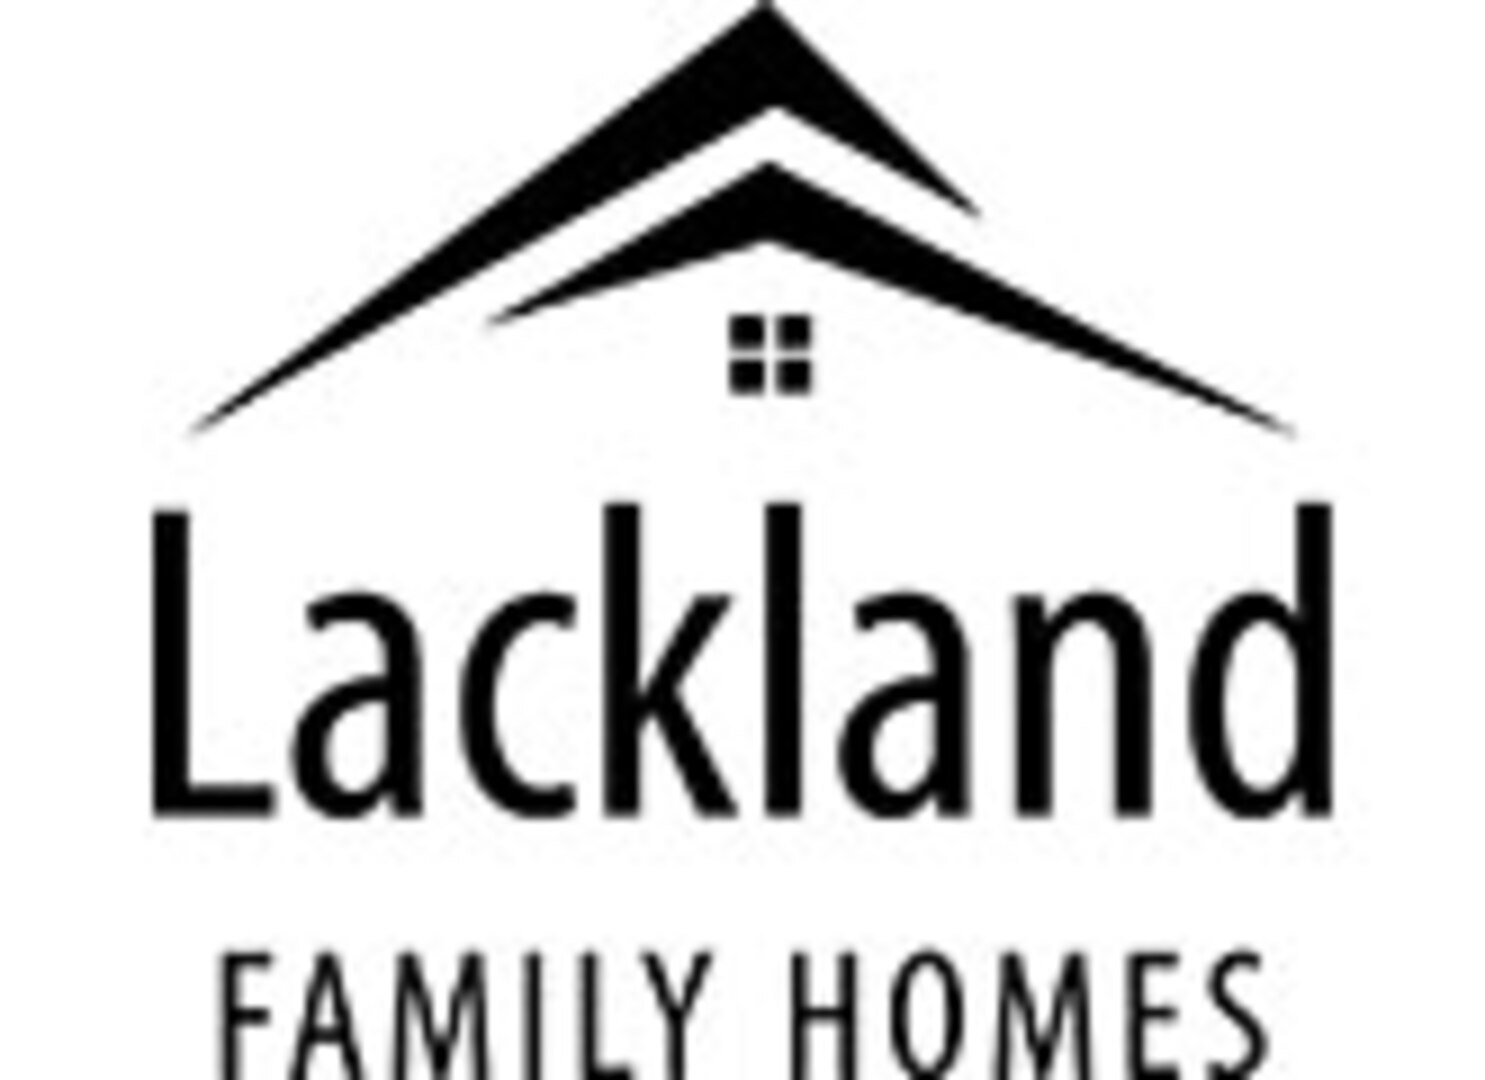 Housing residents are currently being asked to give feedback on Lackland Family Homes operations through the Resident Satisfaction Survey. The annual survey is an important part of our continuous improvement program that helps analyze performance and make any necessary changes and enhancements to ensure quality service is delivered across all aspects of our community operations.